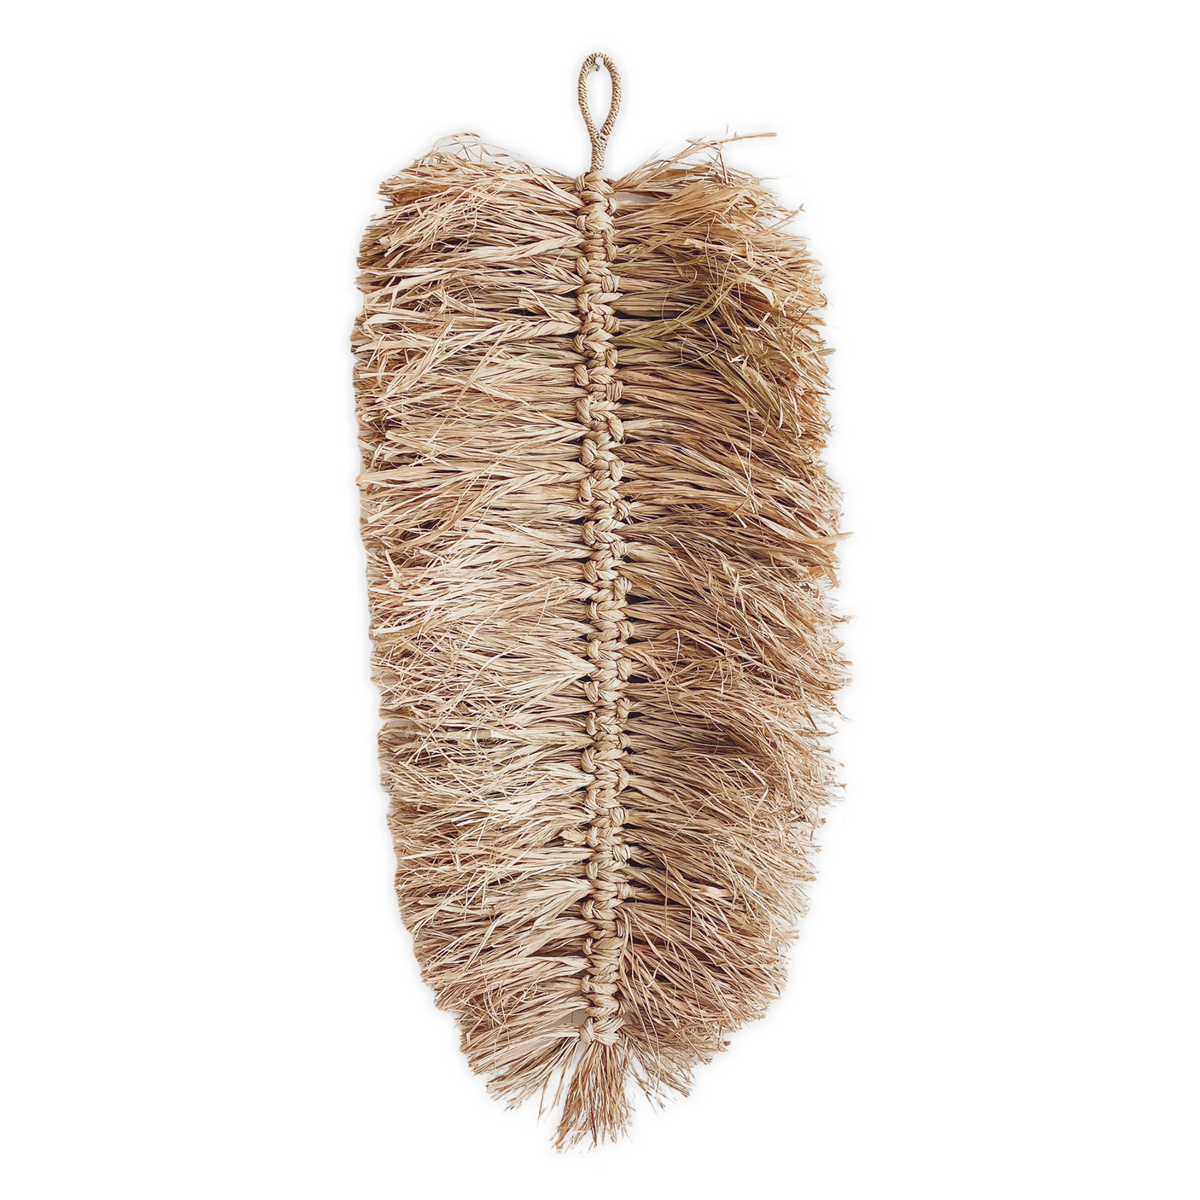 Natural Seagrass, Raffia & Jute combined to create this raw, earthy & simplistic design. The Sienna Seagrass hangings come available in two sizes allowing you to create a wall statement custom made to suit your indoor or alfresco space. 